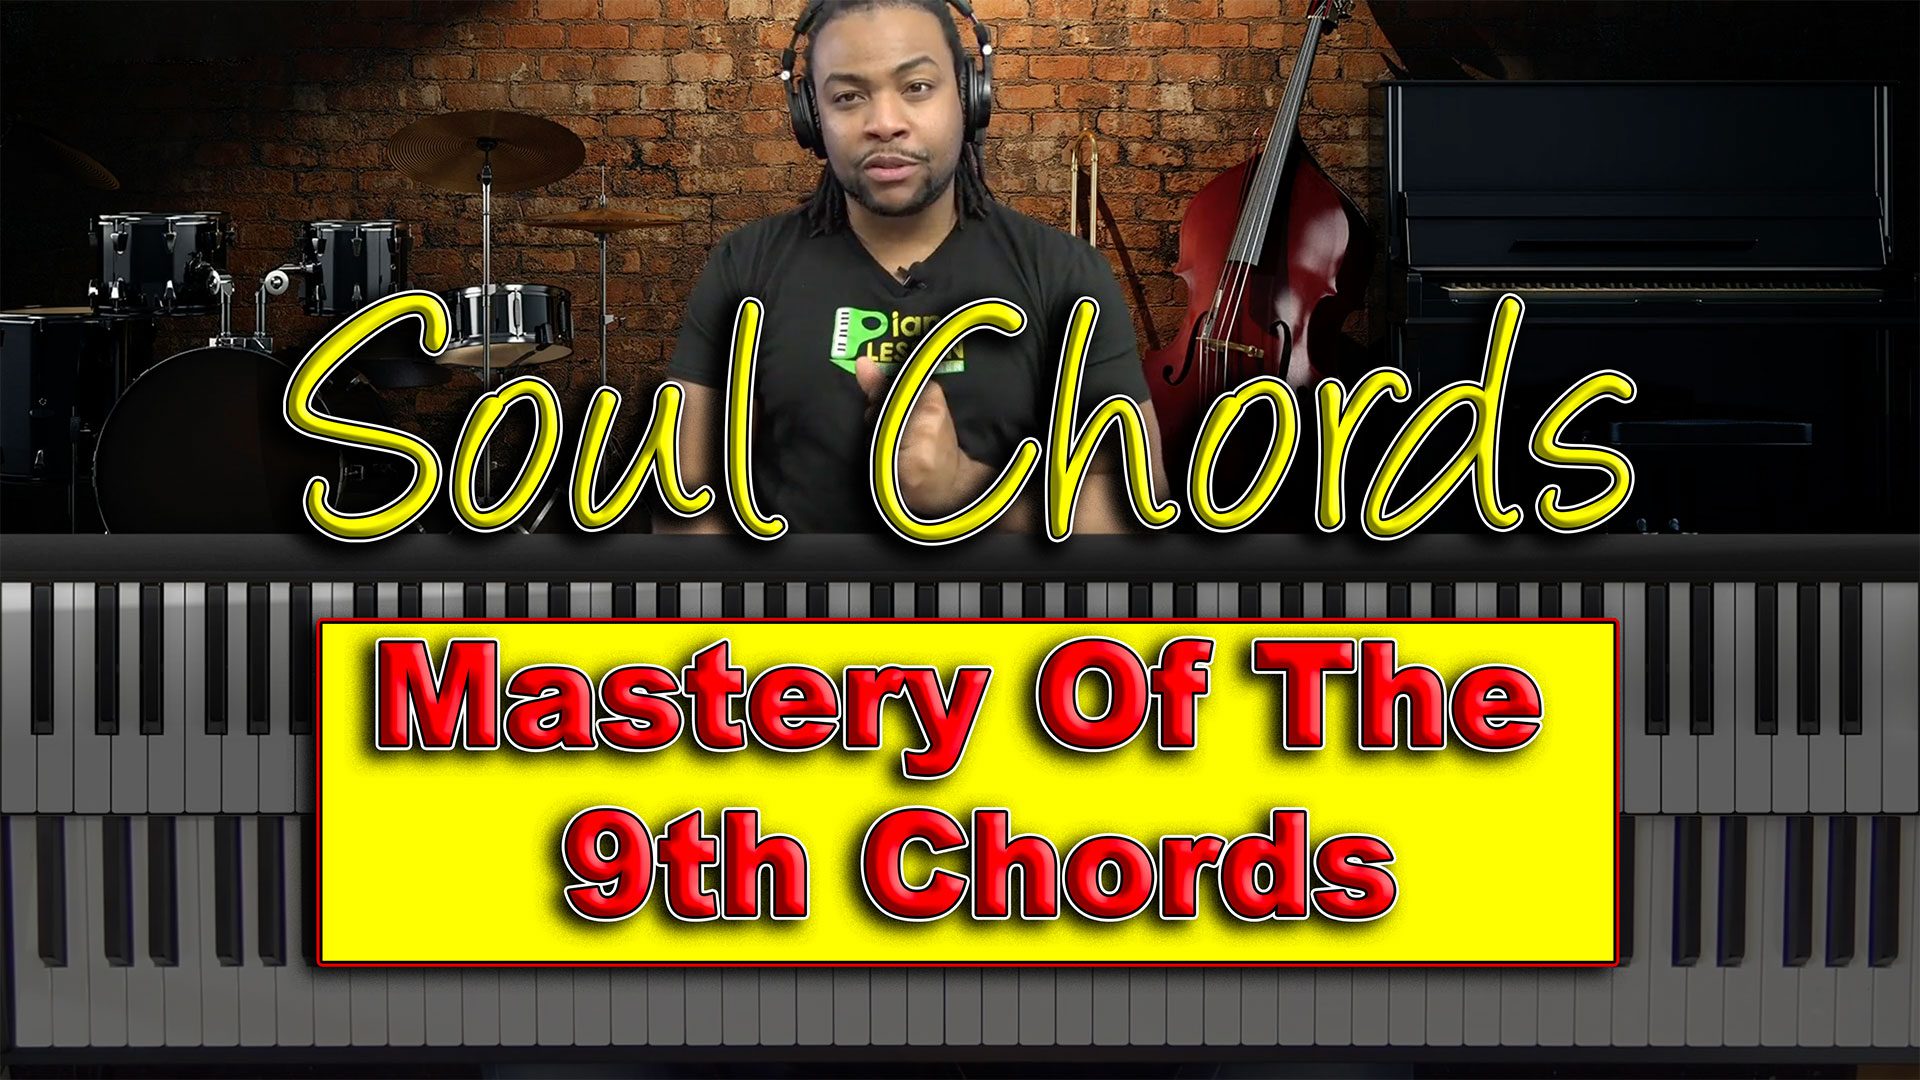 Complete Chord Mastery